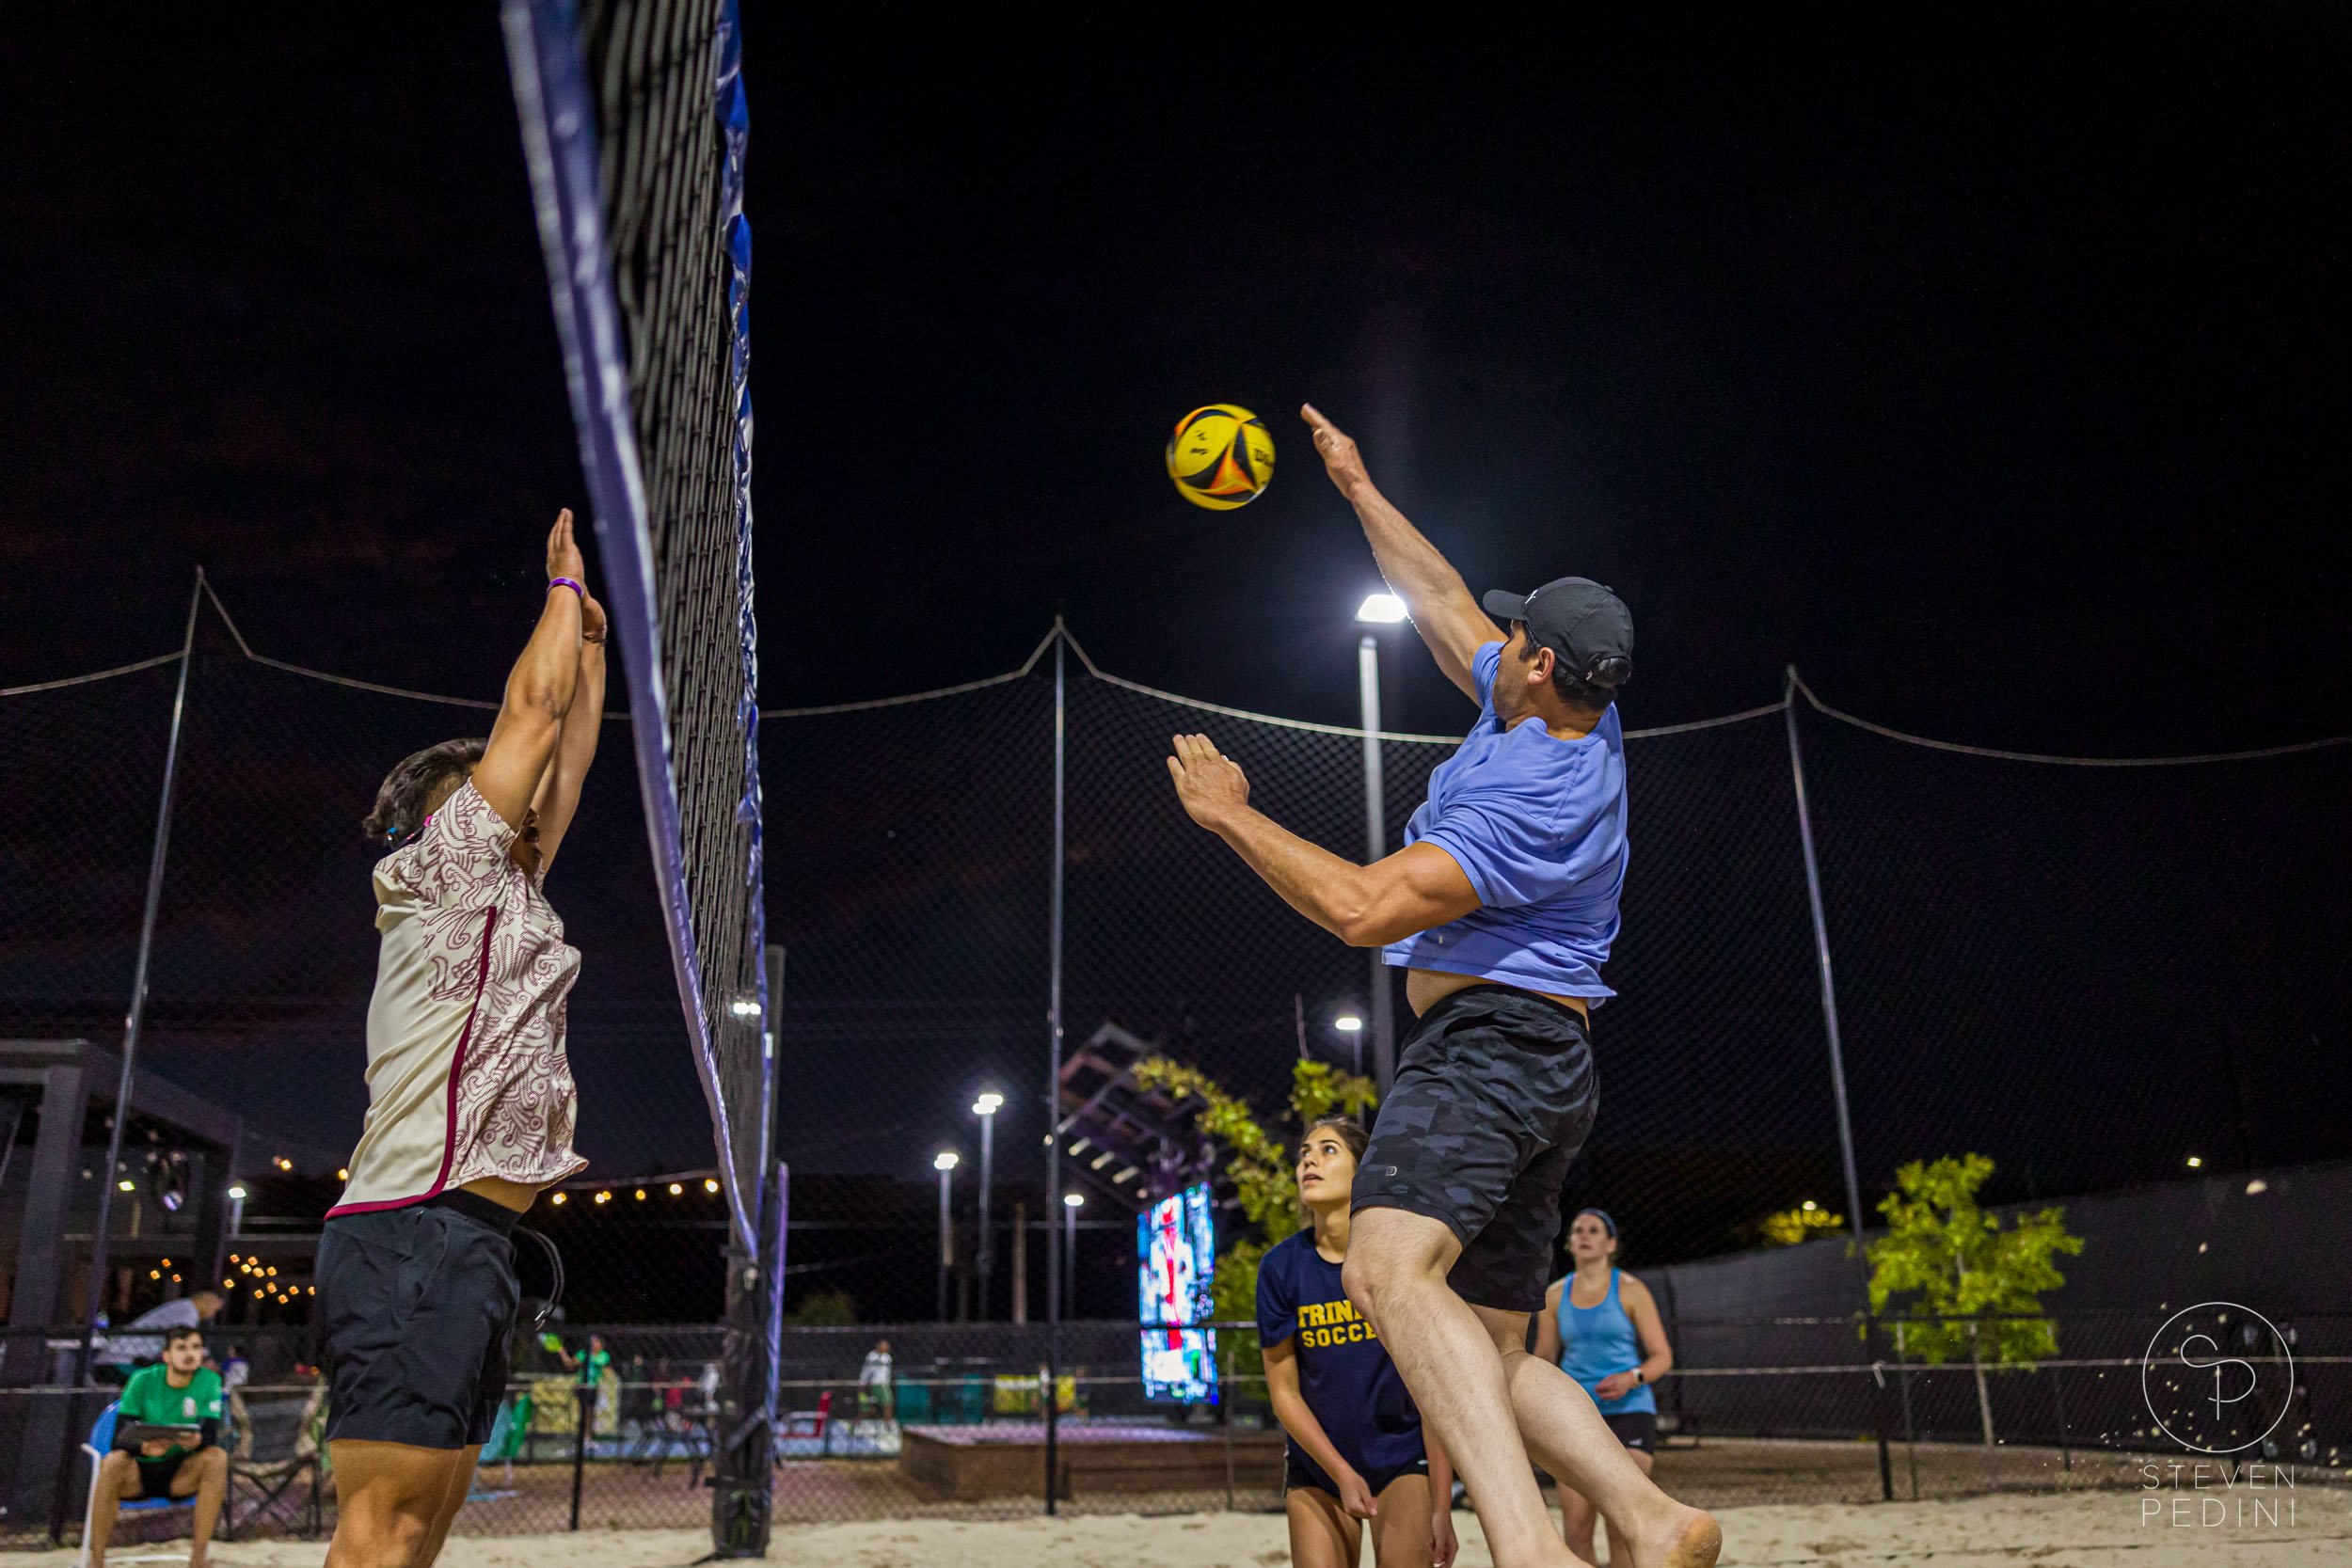 Steven Pedini Photography - Bumpy Pickle - Sand Volleyball - Houston TX - World Cup of Volleyball - 00385.jpg